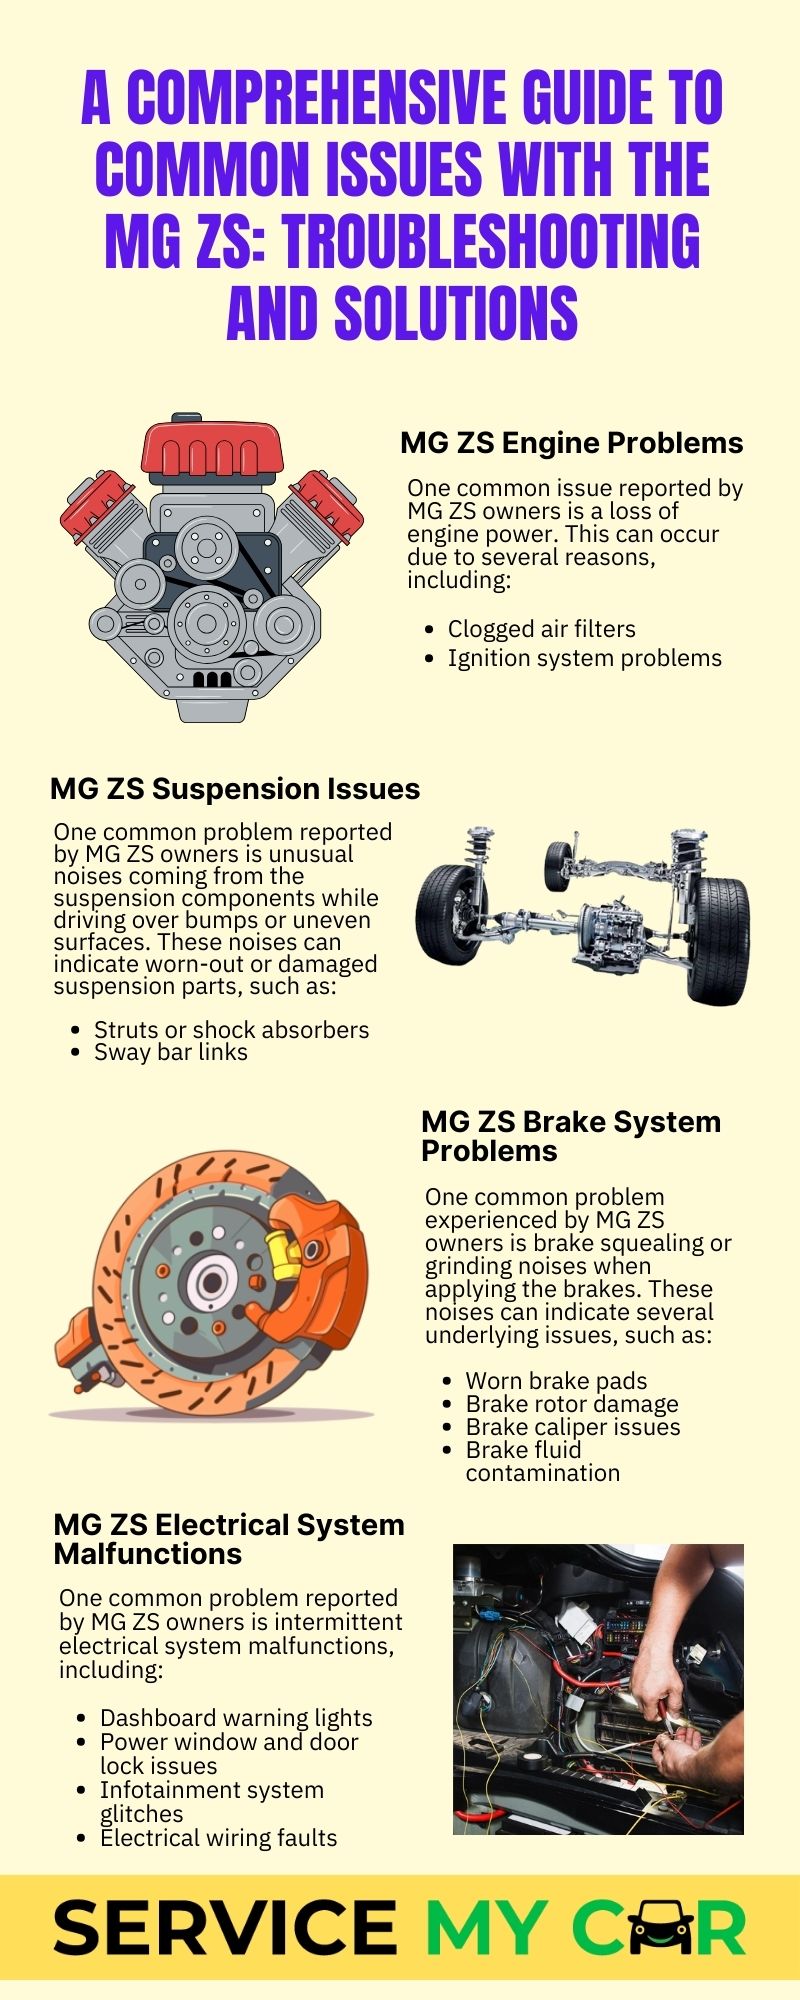 A Comprehensive Guide to Common Issues with the MG ZS